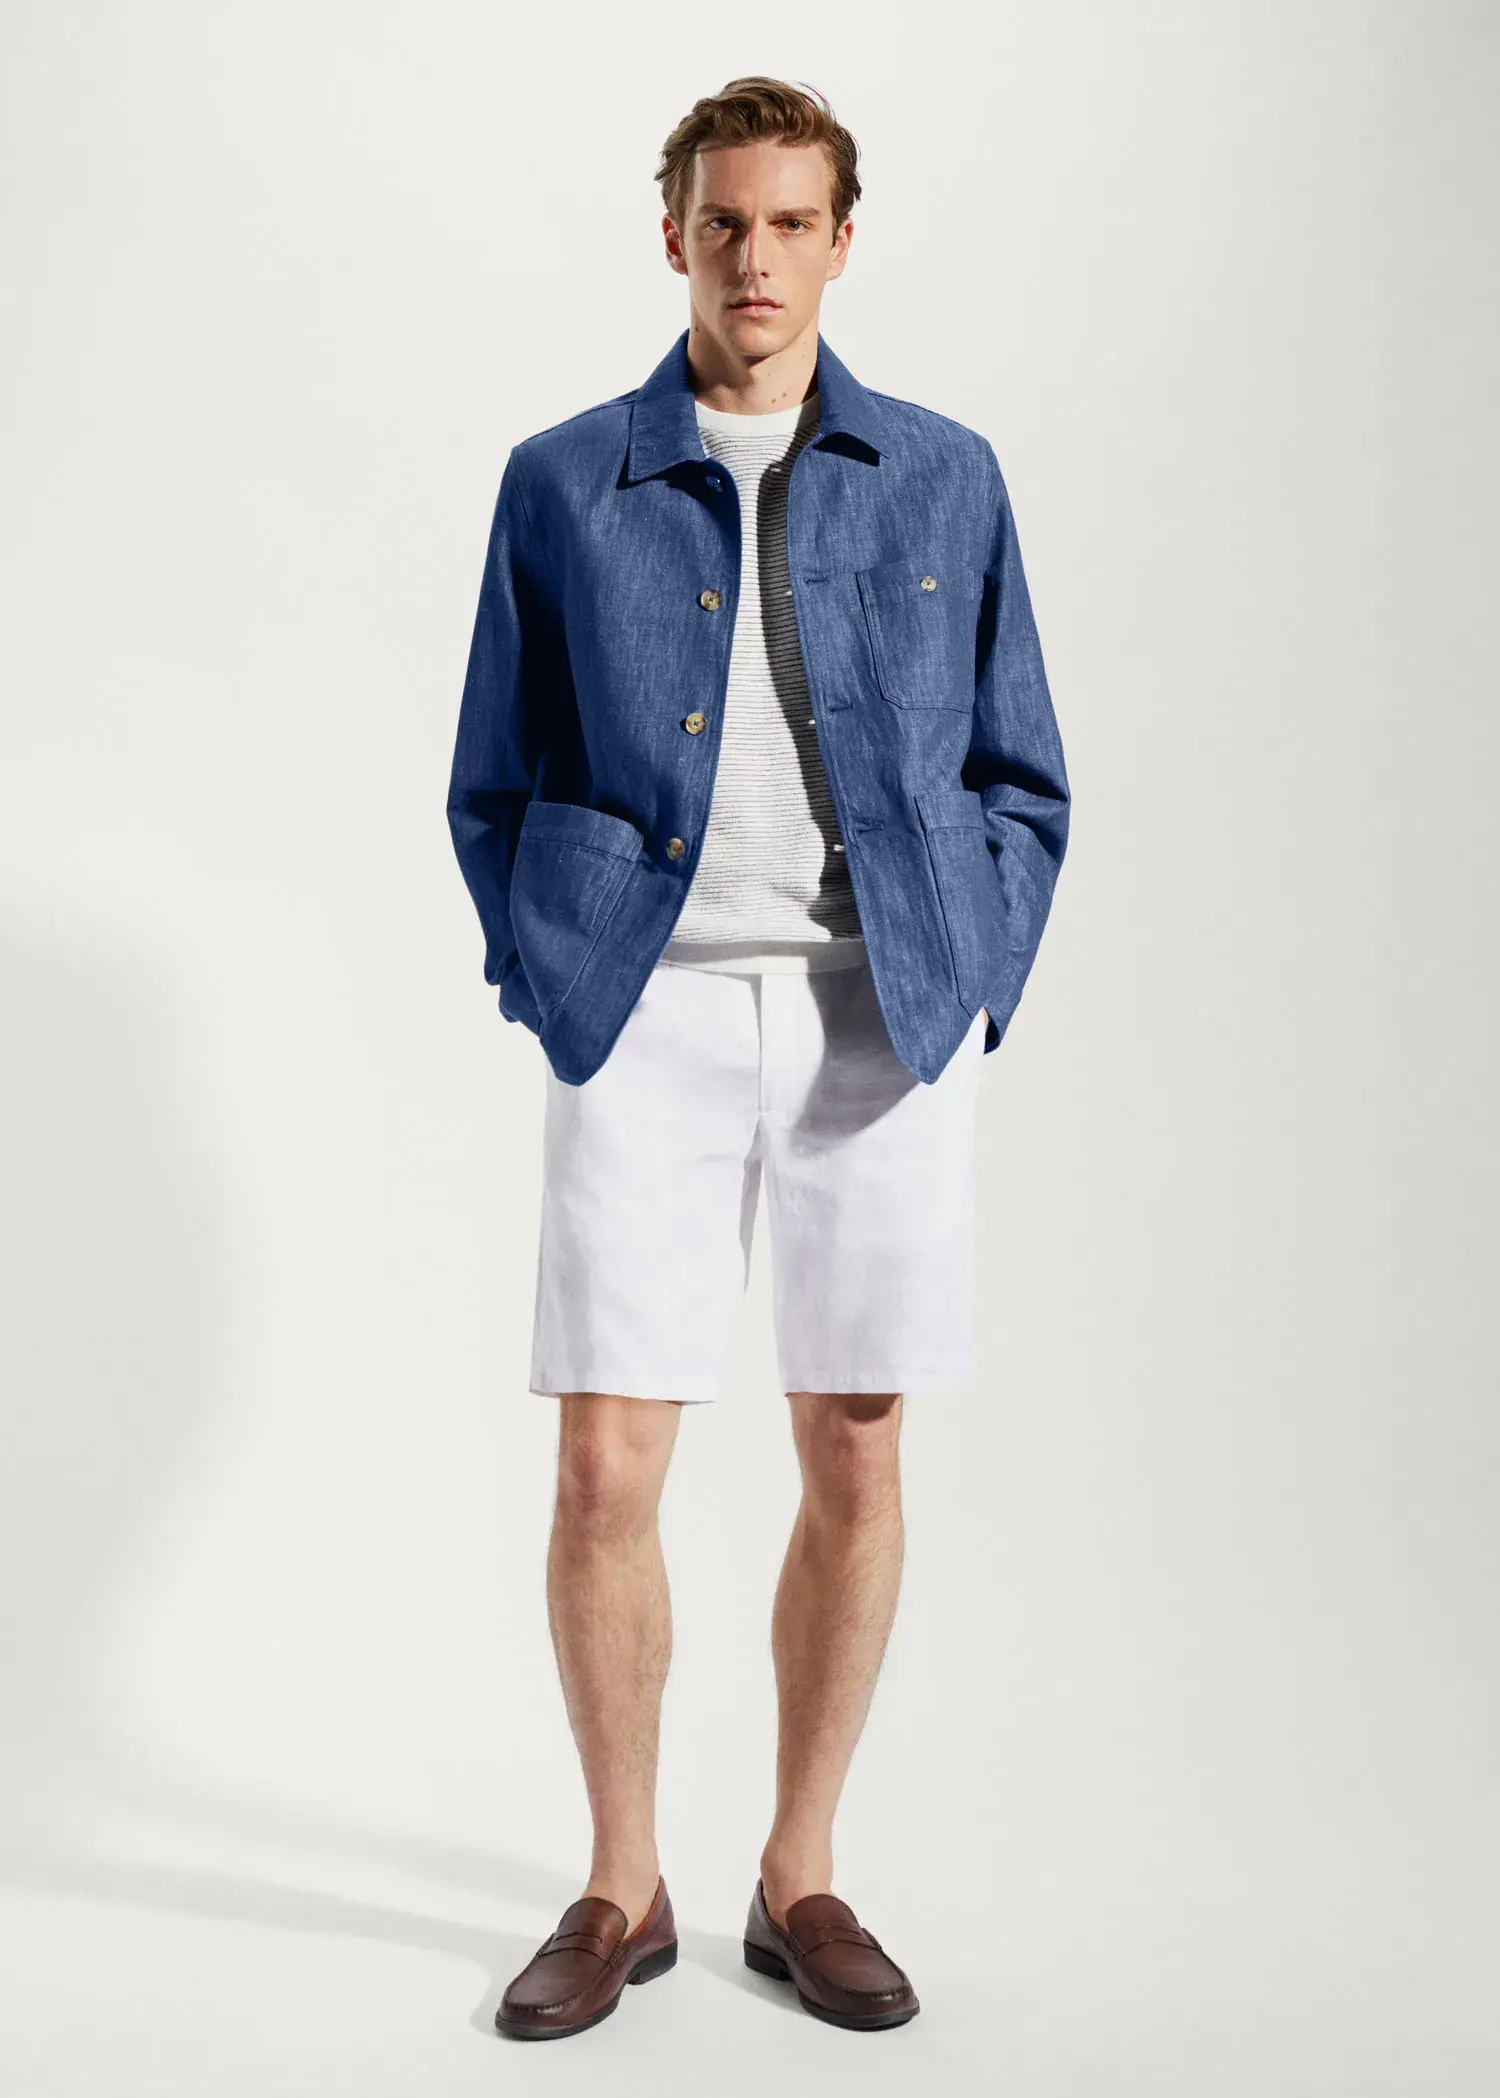 Mango Cotton-linen jacket with pockets. a man wearing a blue jacket and white shorts. 